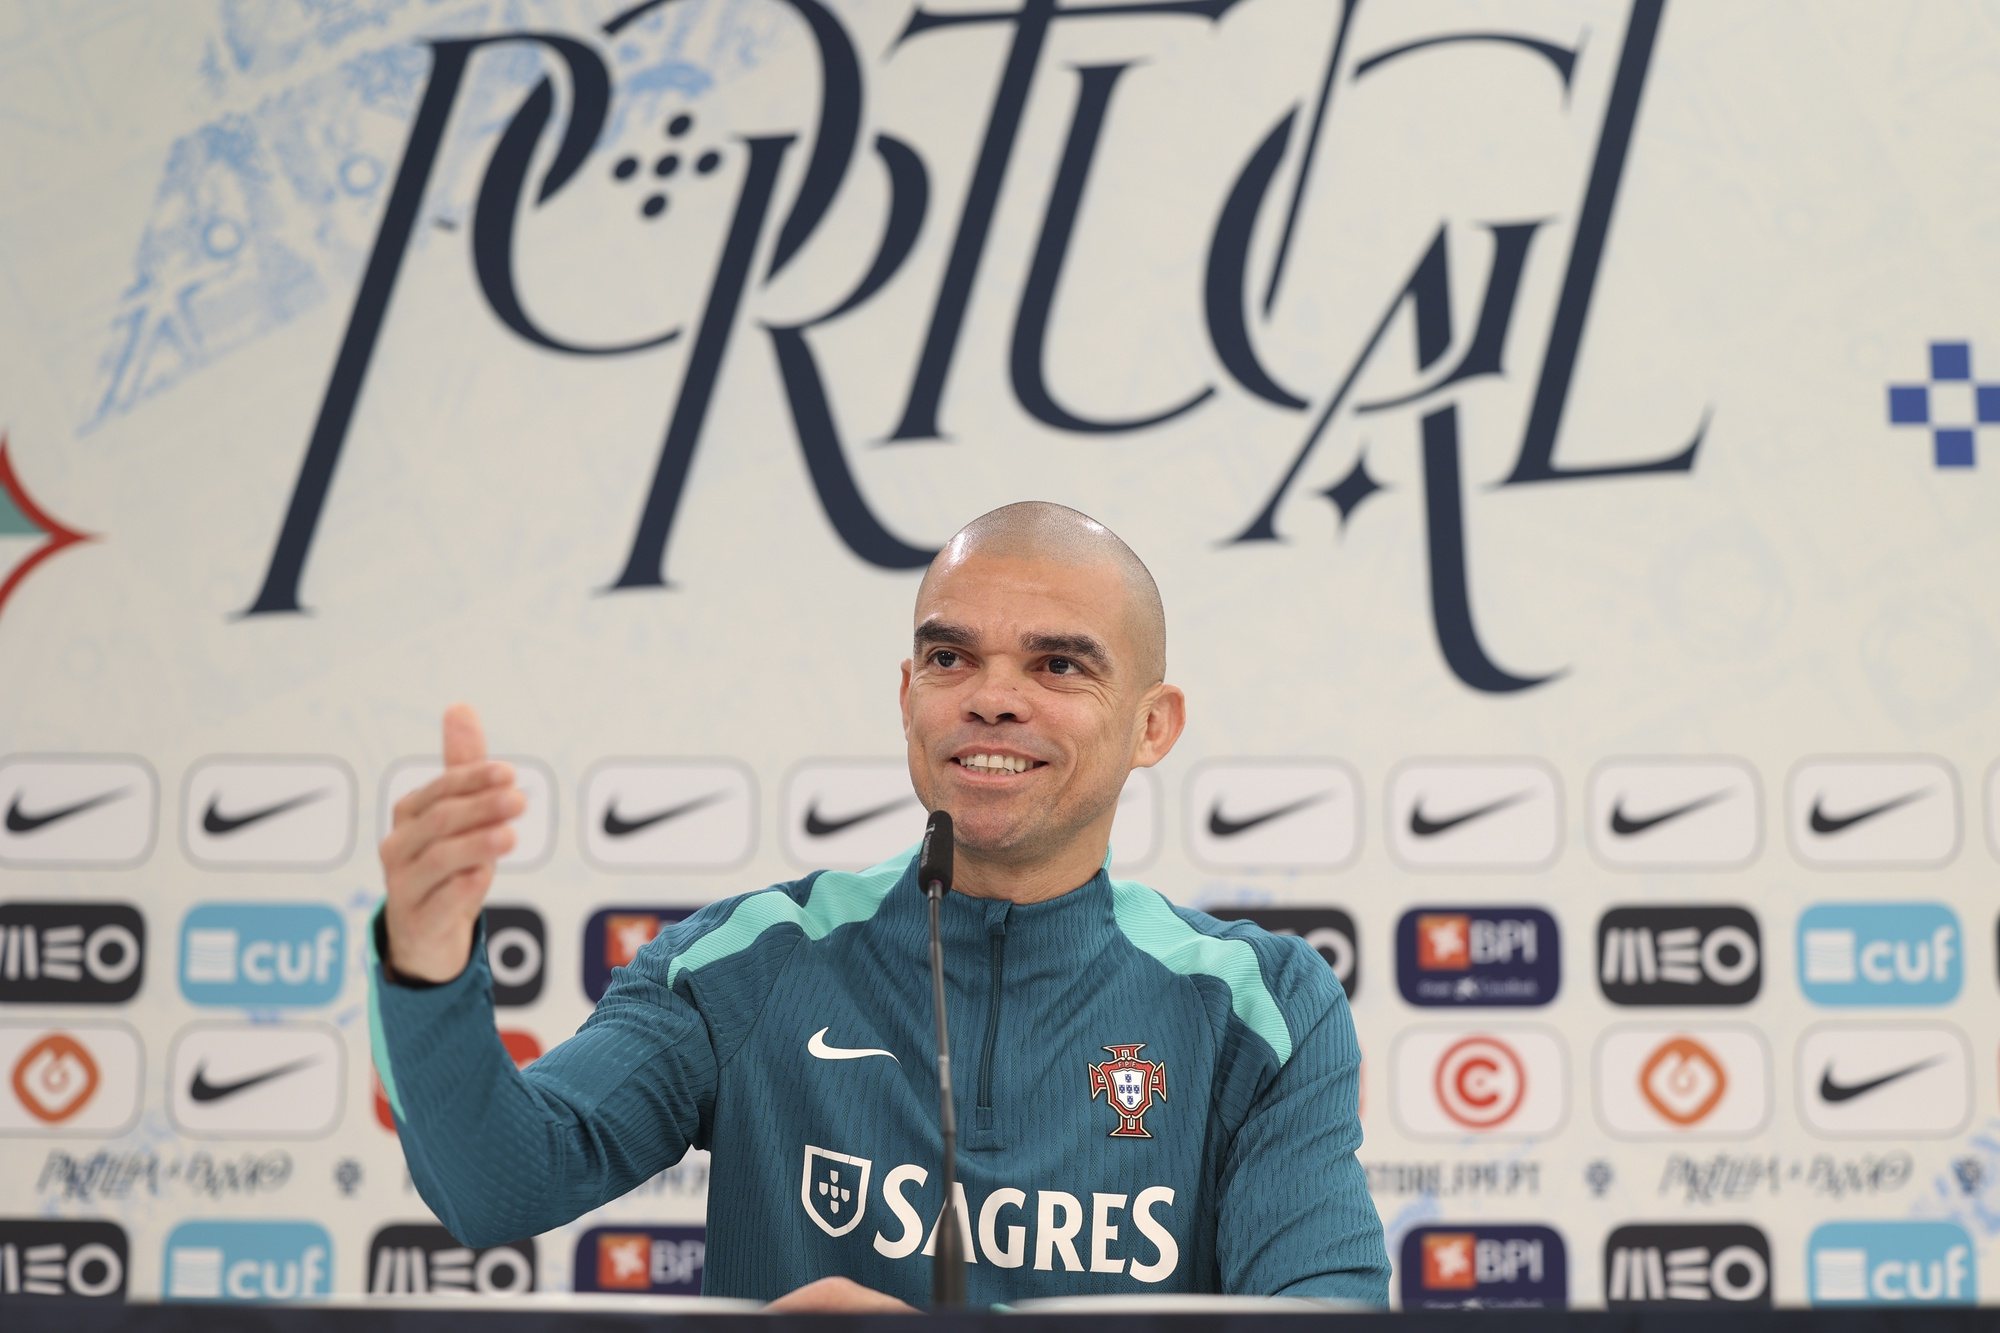 Portugal national soccer team player Pepe attends a press conference in Marienfeld, Harsewinkel, Germany, 28 June 2024. The Portuguese national soccer team is based in Marienfeld, Harsewinkel during the UEFA EURO 2024. MIGUEL A. LOPES/LUSA